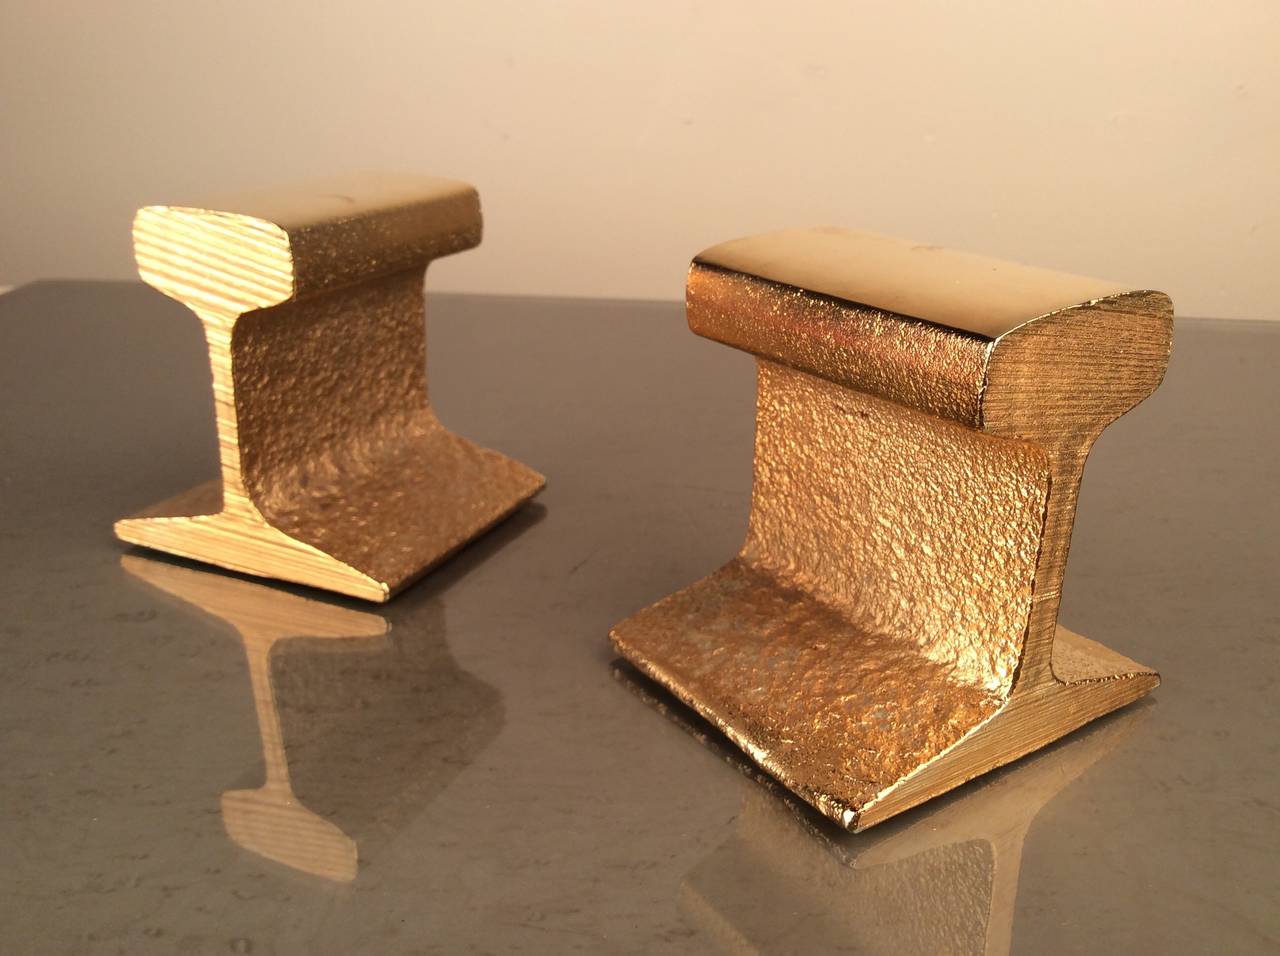 Industrial meets glam! MidCentury cast metal railroad tie bookends plated in 24 karat gold. Stunning look, heavy construction and in mint, unused condition (were still packed in original box when found).